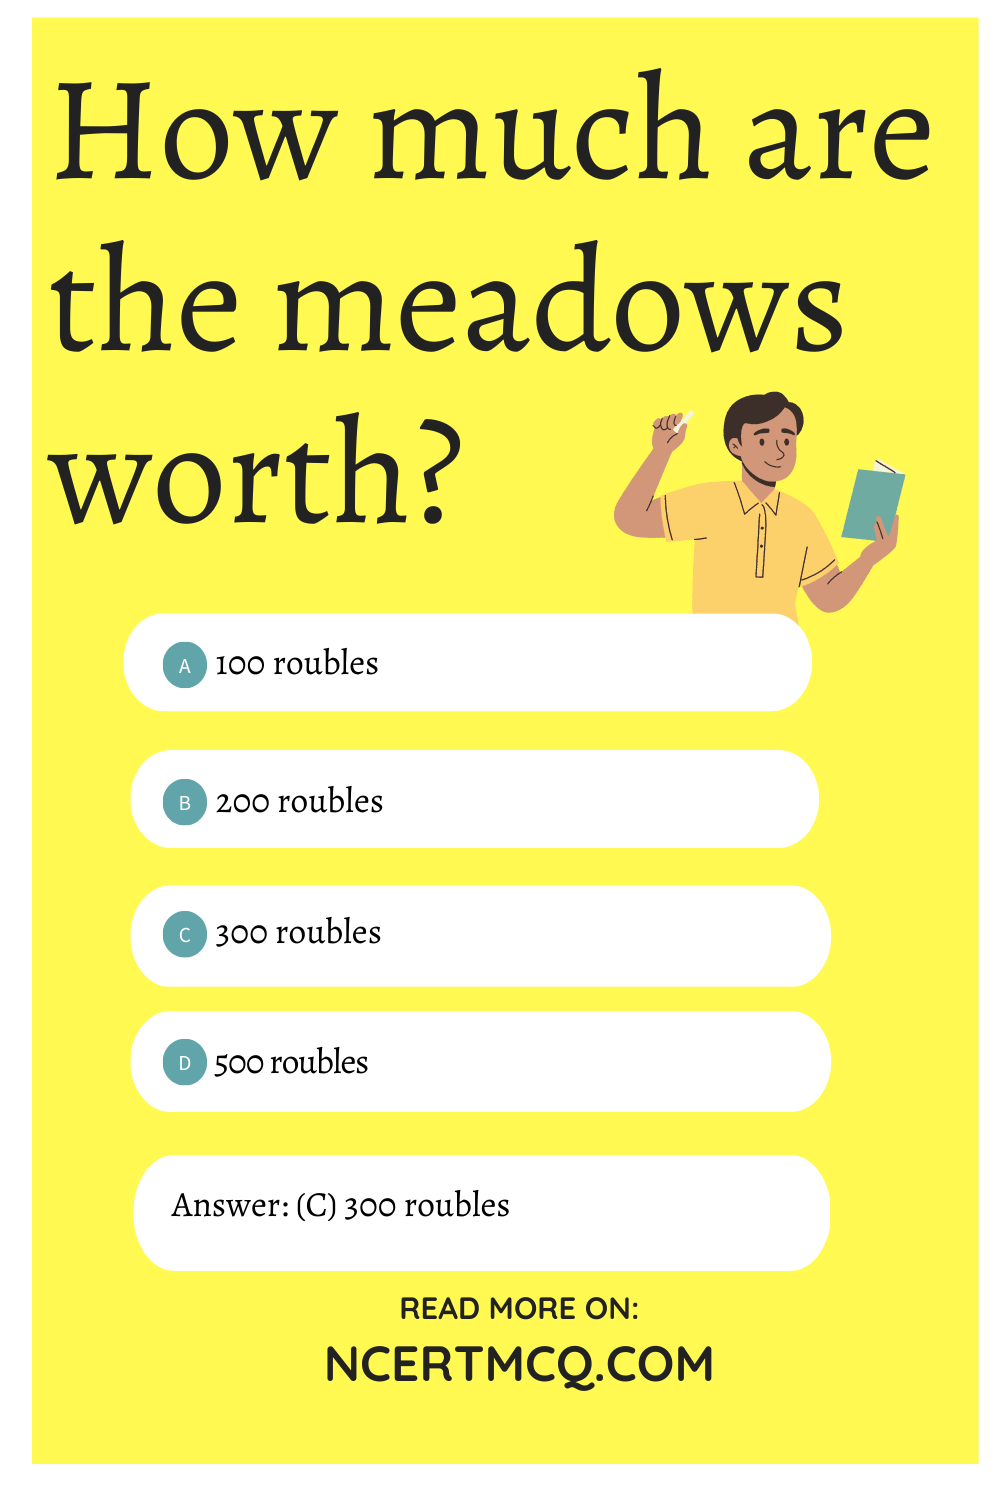 How much are the meadows worth?